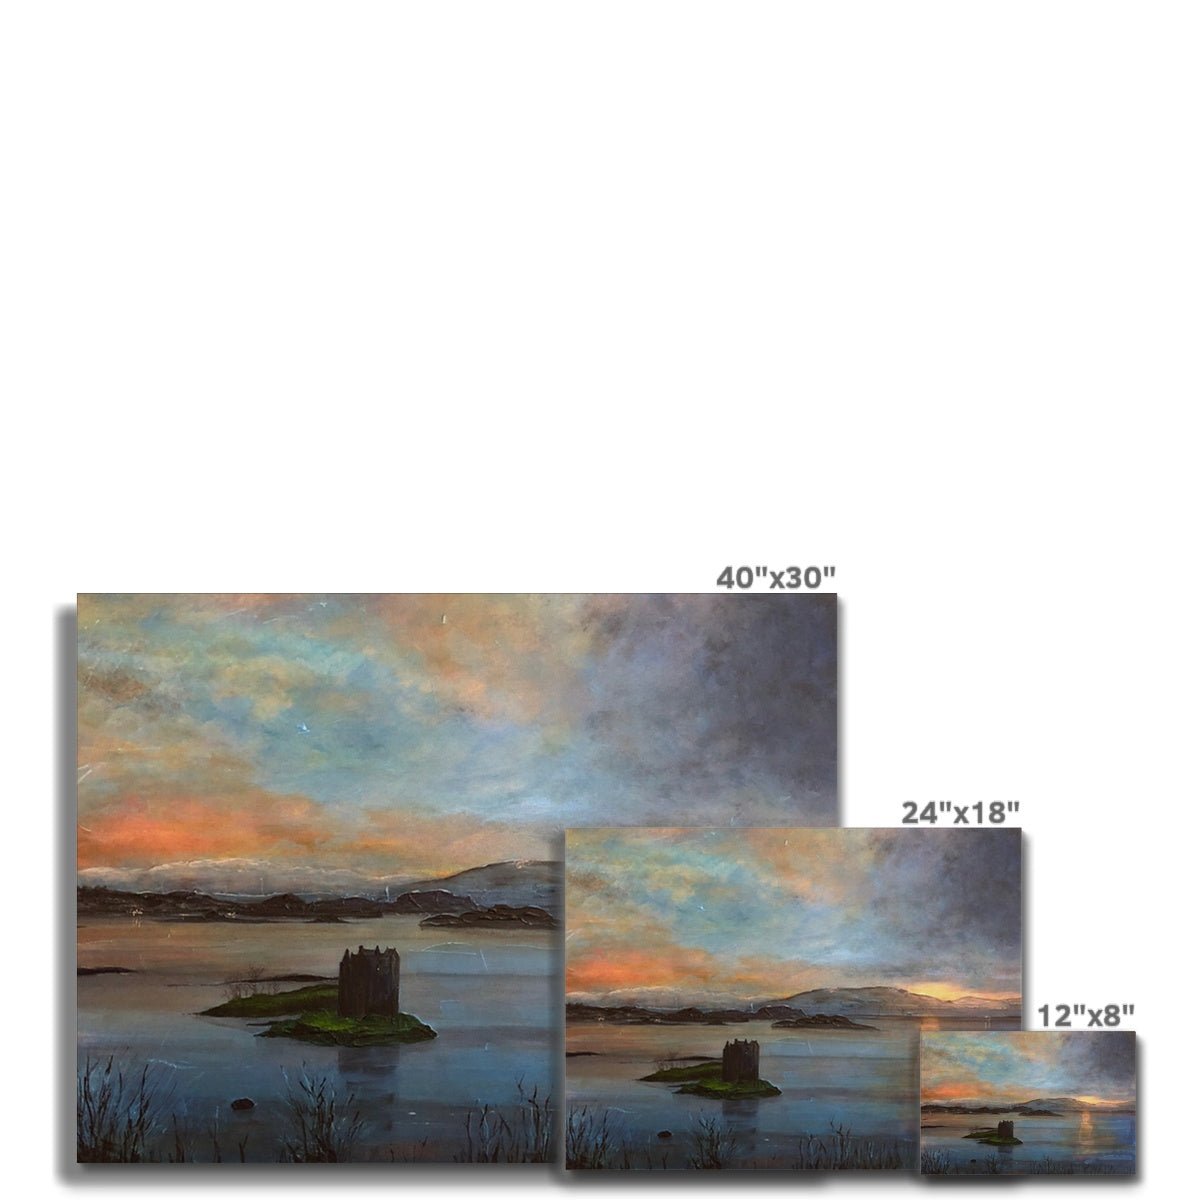 Castle Stalker Twilight Painting | Canvas From Scotland-Contemporary Stretched Canvas Prints-Scottish Castles Art Gallery-Paintings, Prints, Homeware, Art Gifts From Scotland By Scottish Artist Kevin Hunter